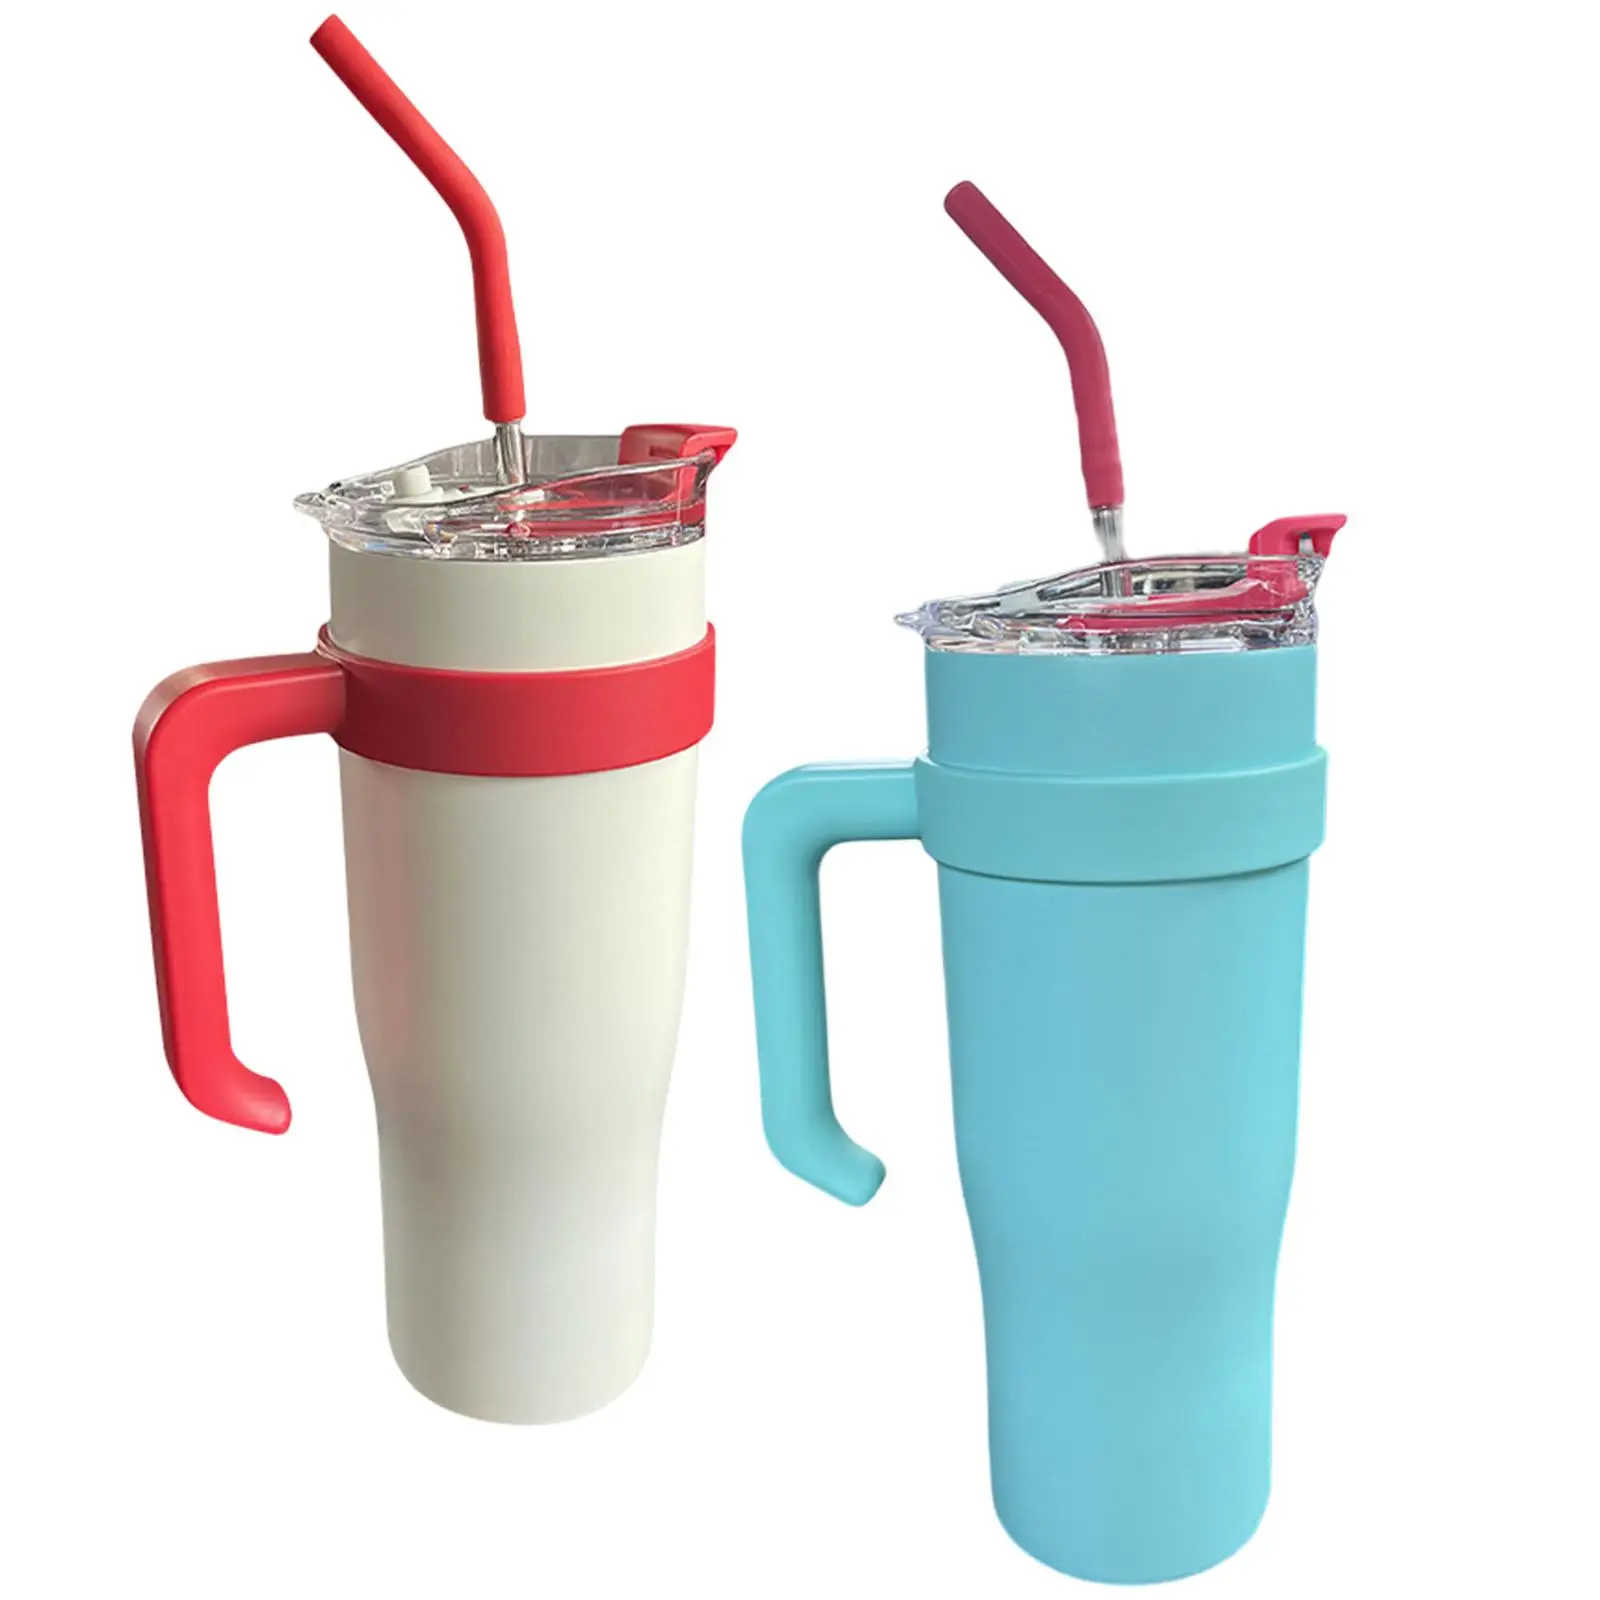 Insulated Sippy Cup with Straw and Lid Durable Thermal Cup Insulated Cup Water Bottle Cup for Car Travel Cold Hot Drinks